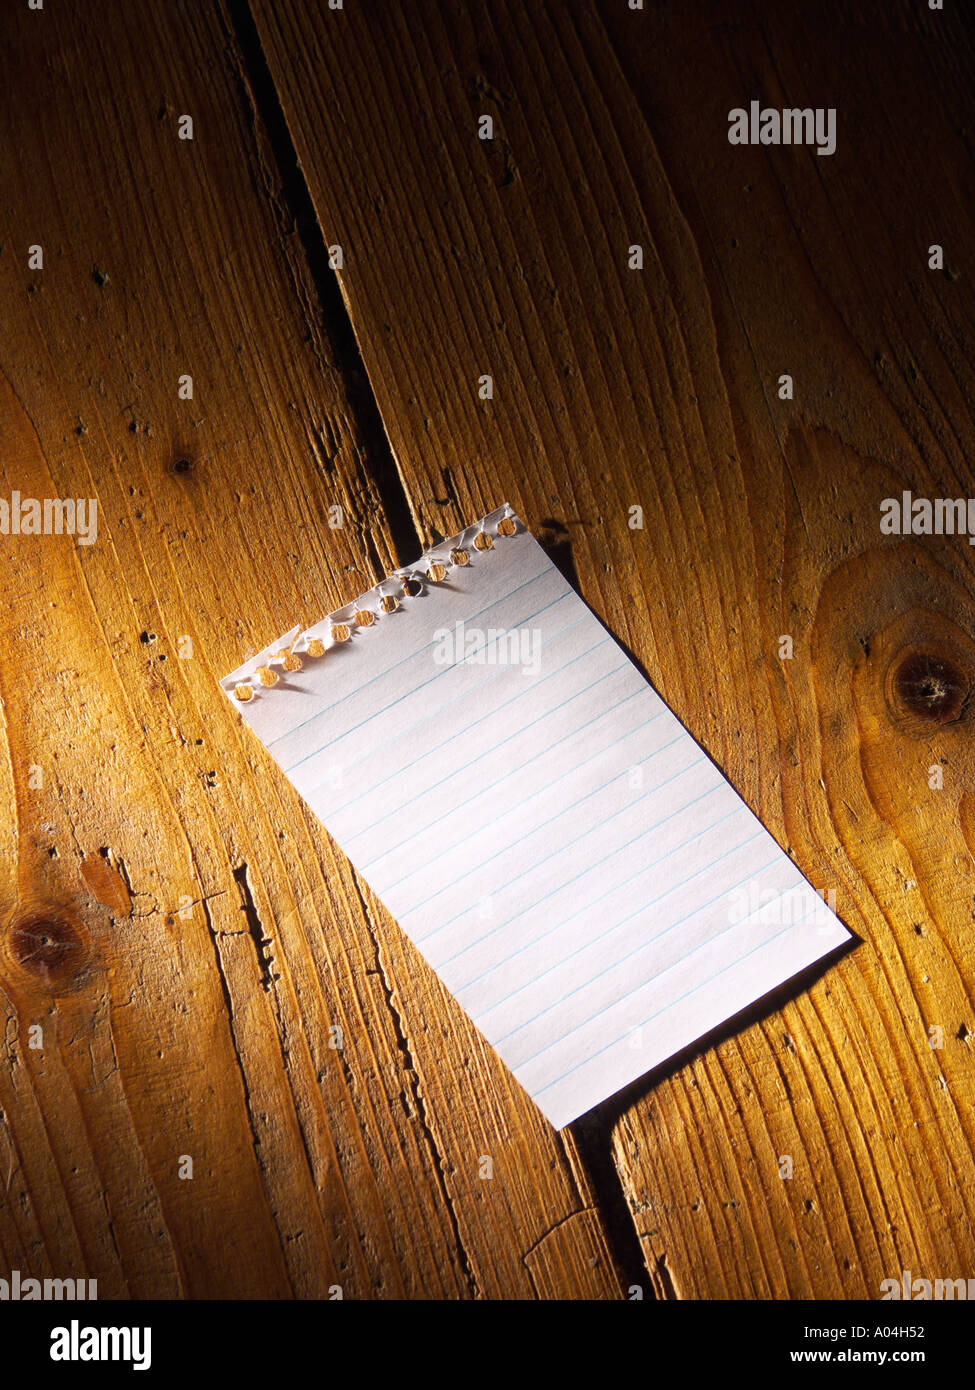 Blank note dropped on floor Stock Photo